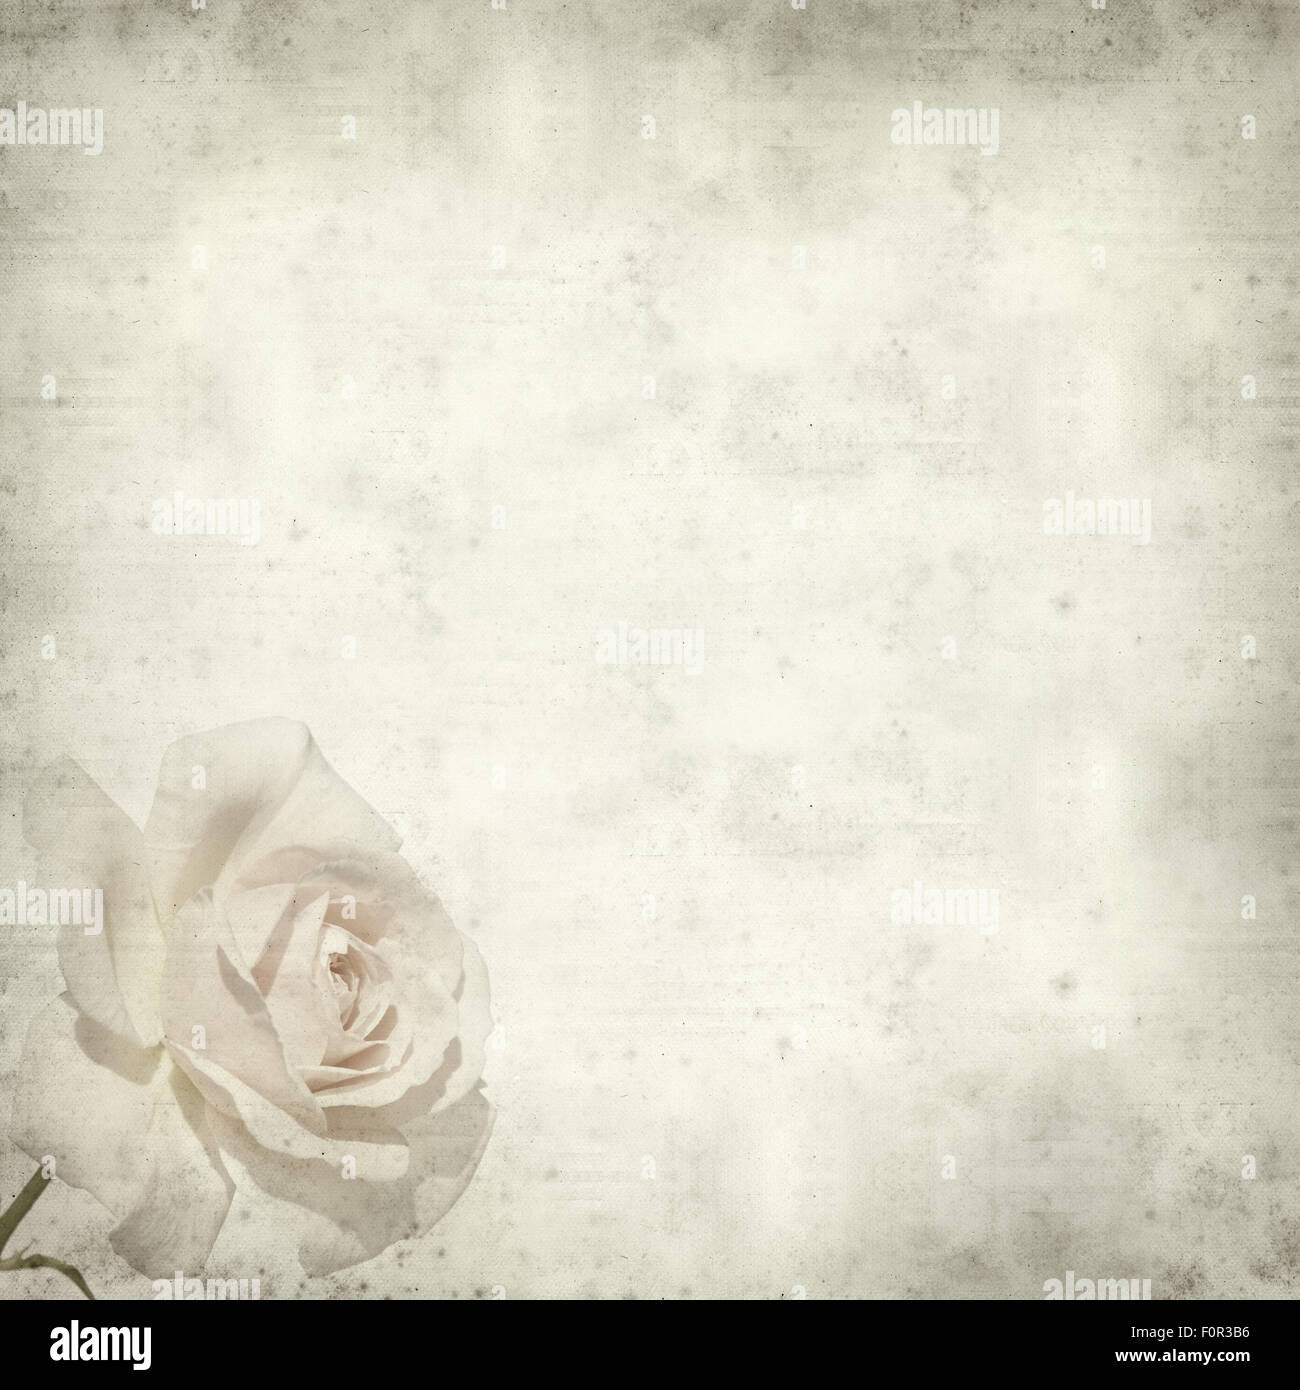 12646 English Roses Wallpaper Images Stock Photos  Vectors  Shutterstock